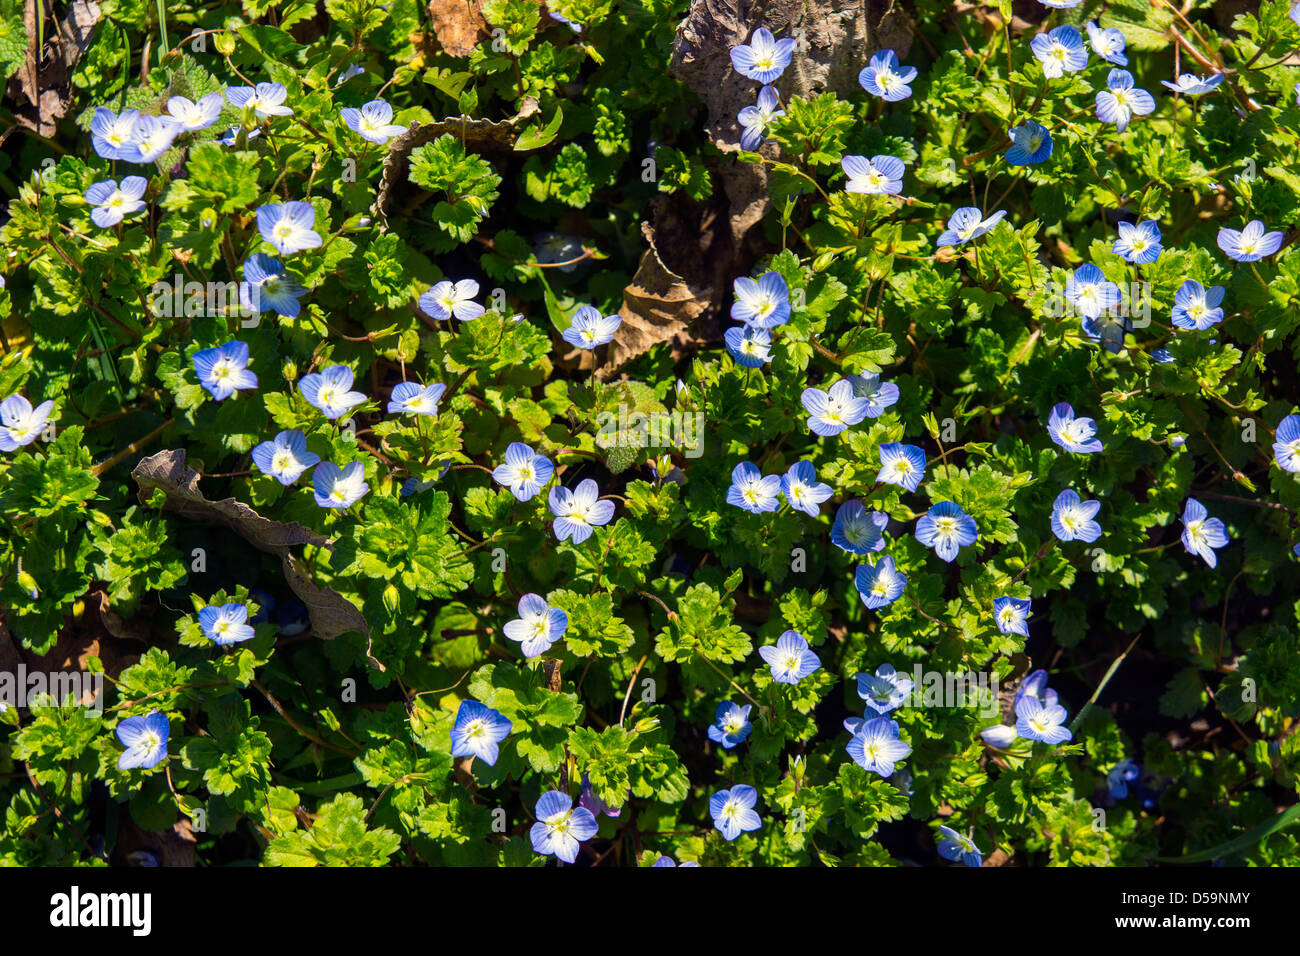 Forget-me-not blue flowers with green foliage Stock Photo